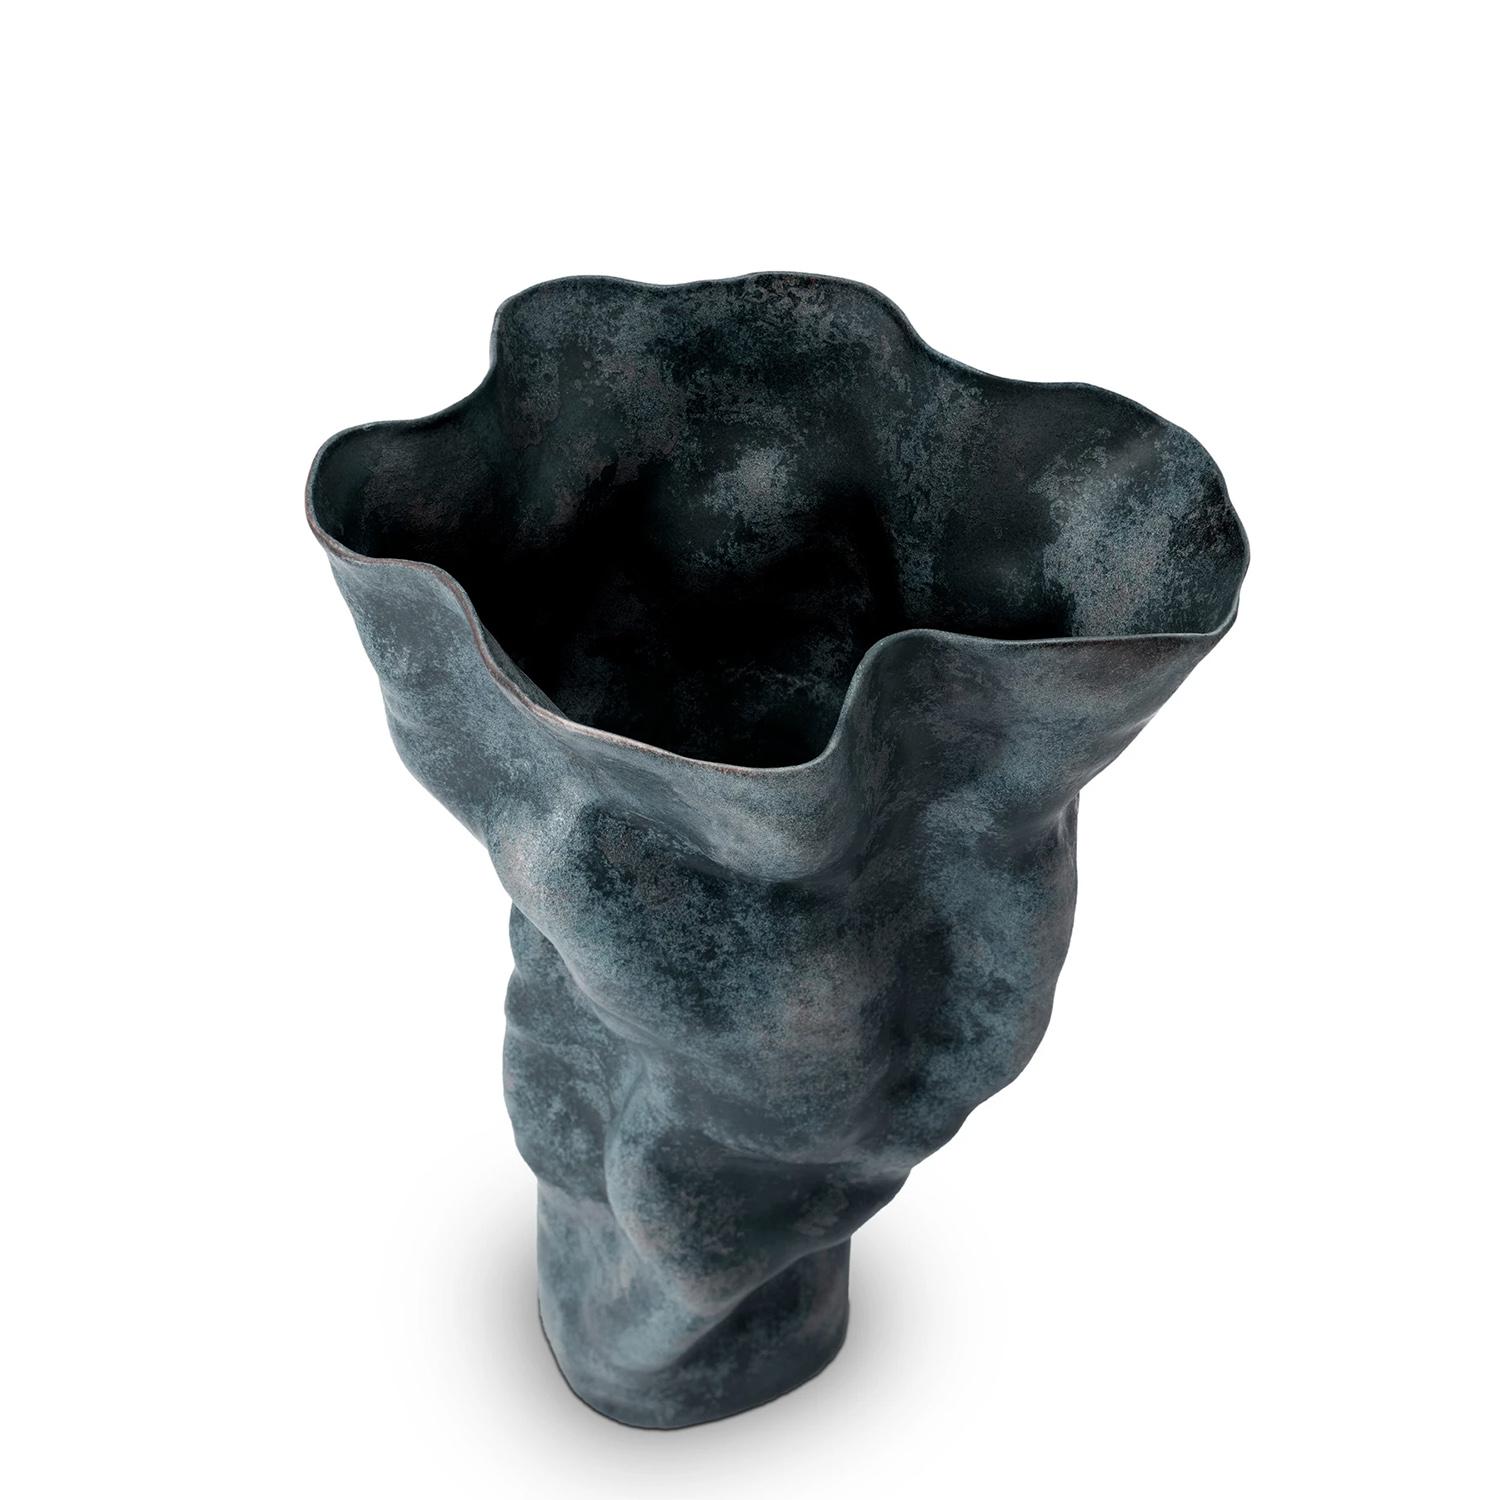 Vase Amy all in porcelain, hand-glazed 
and sculpted. Porcelain with a mineral 
finishing.
 